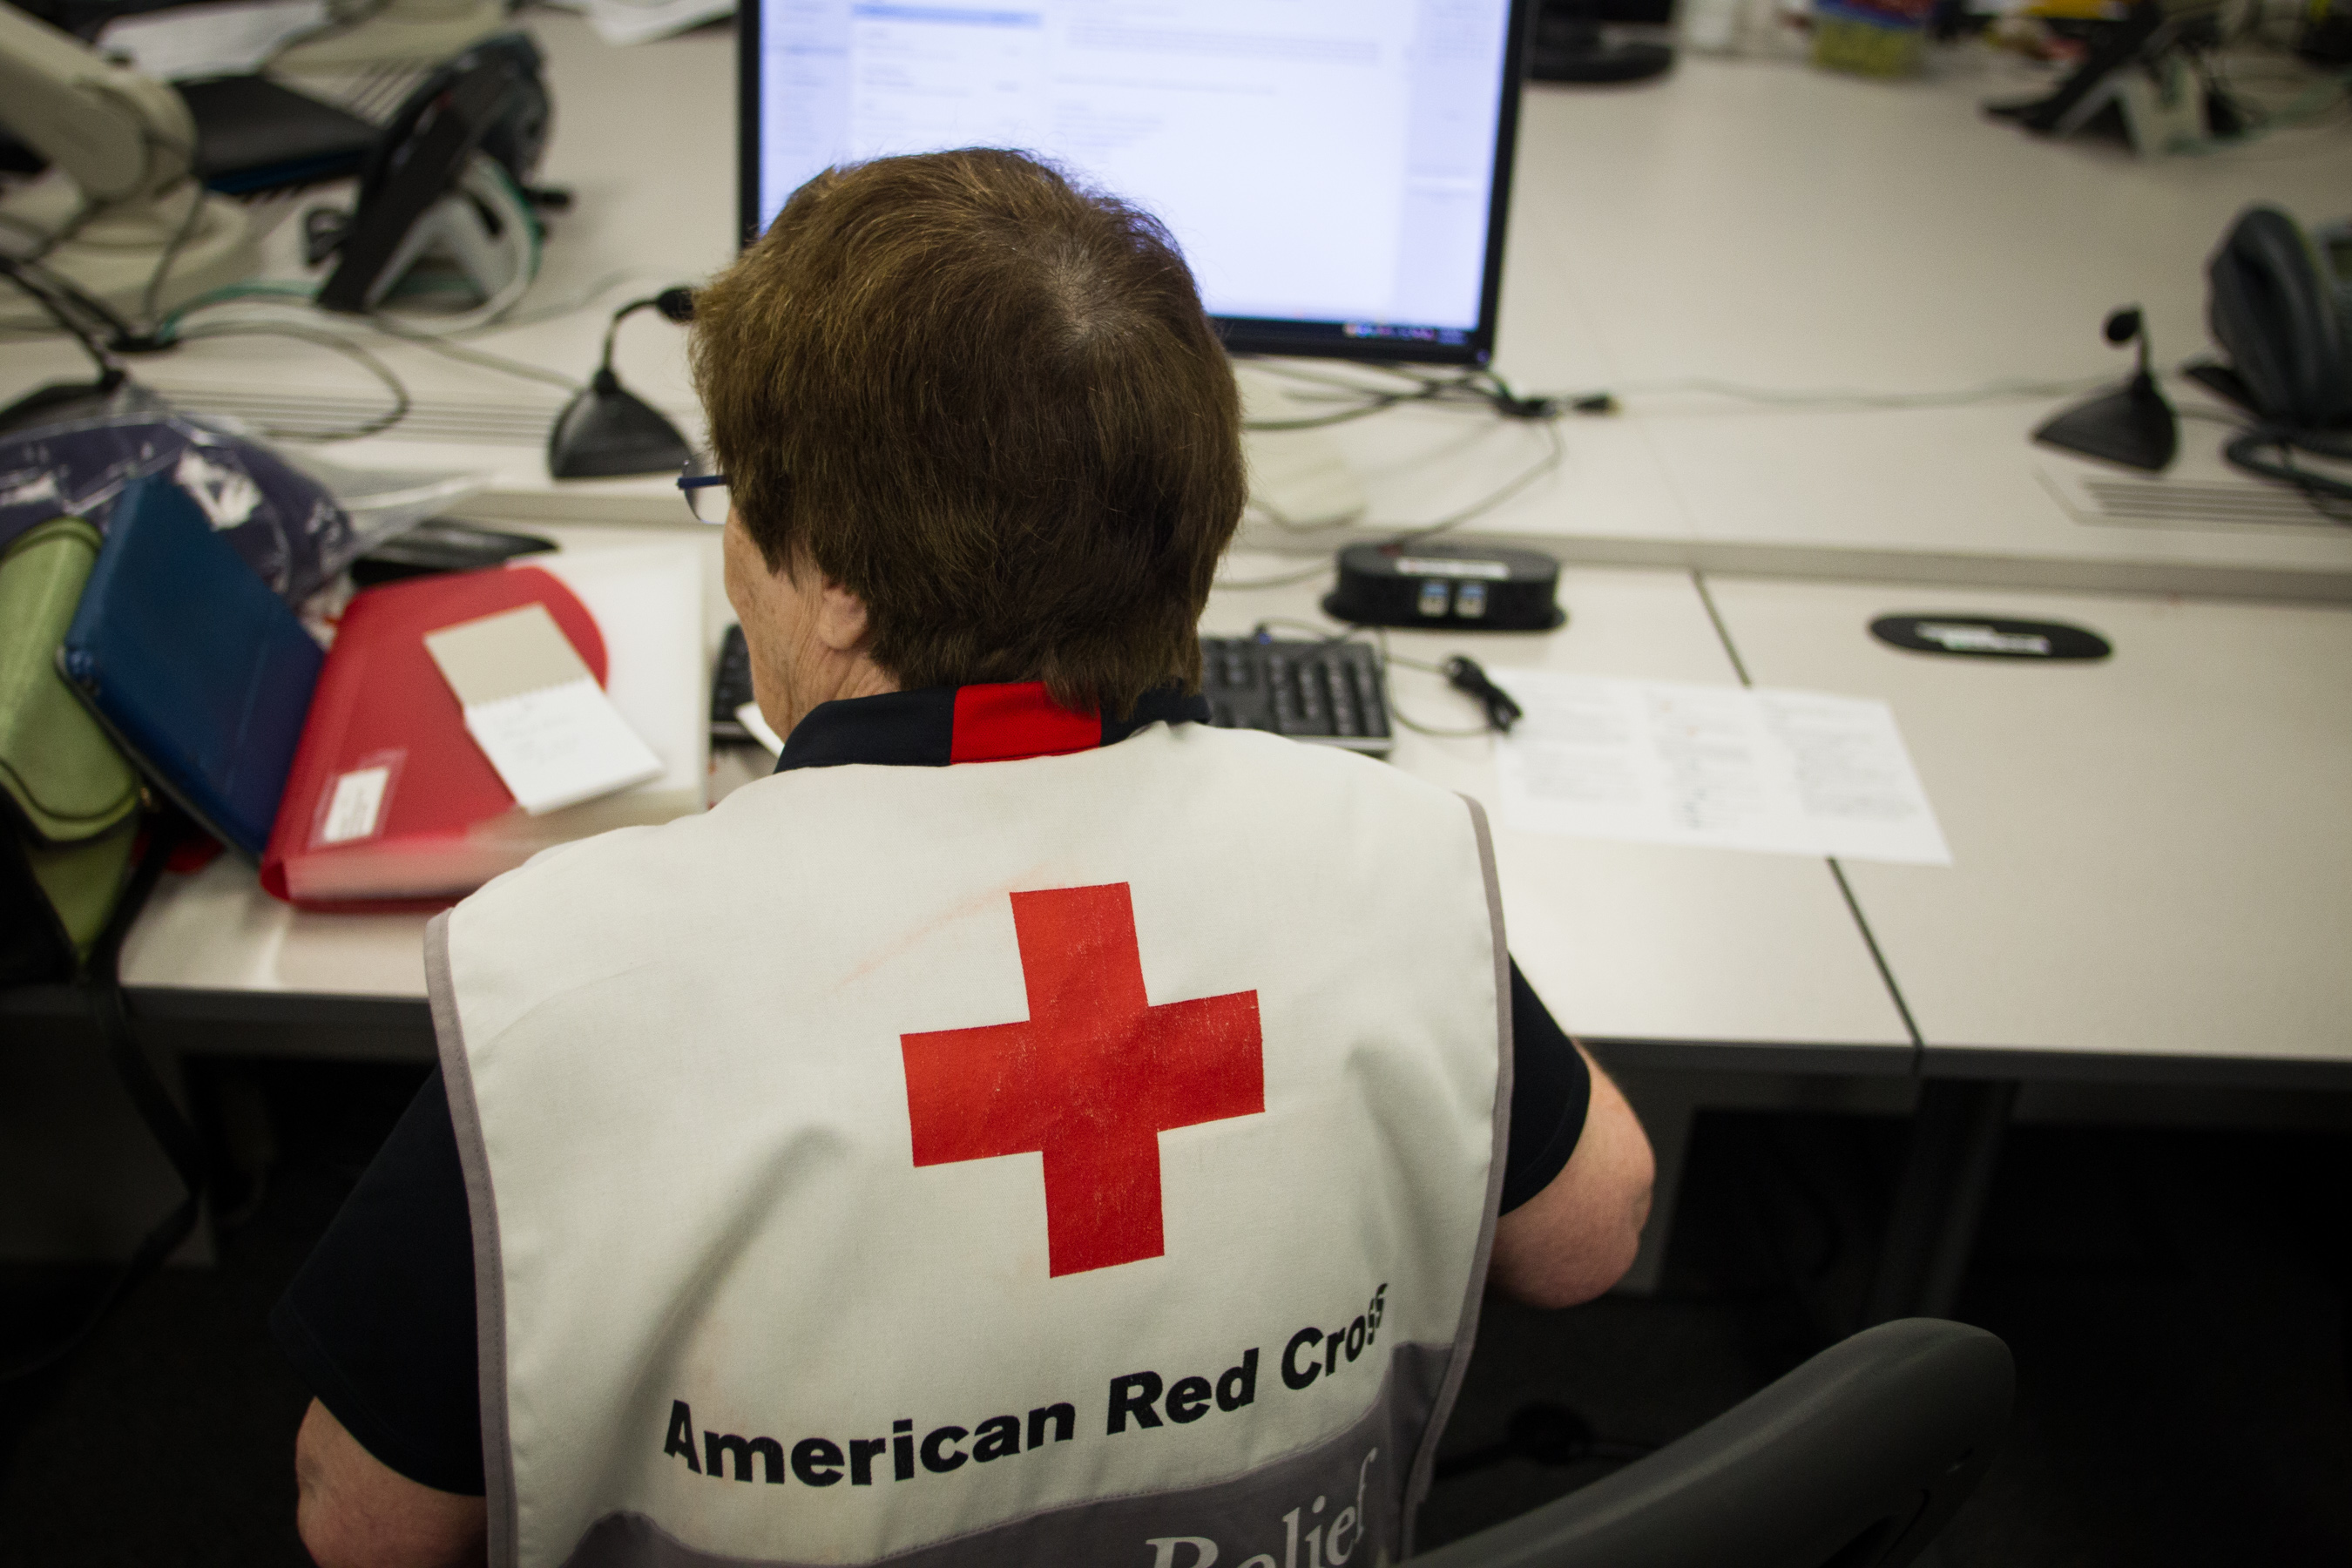 American Red Cross personnel